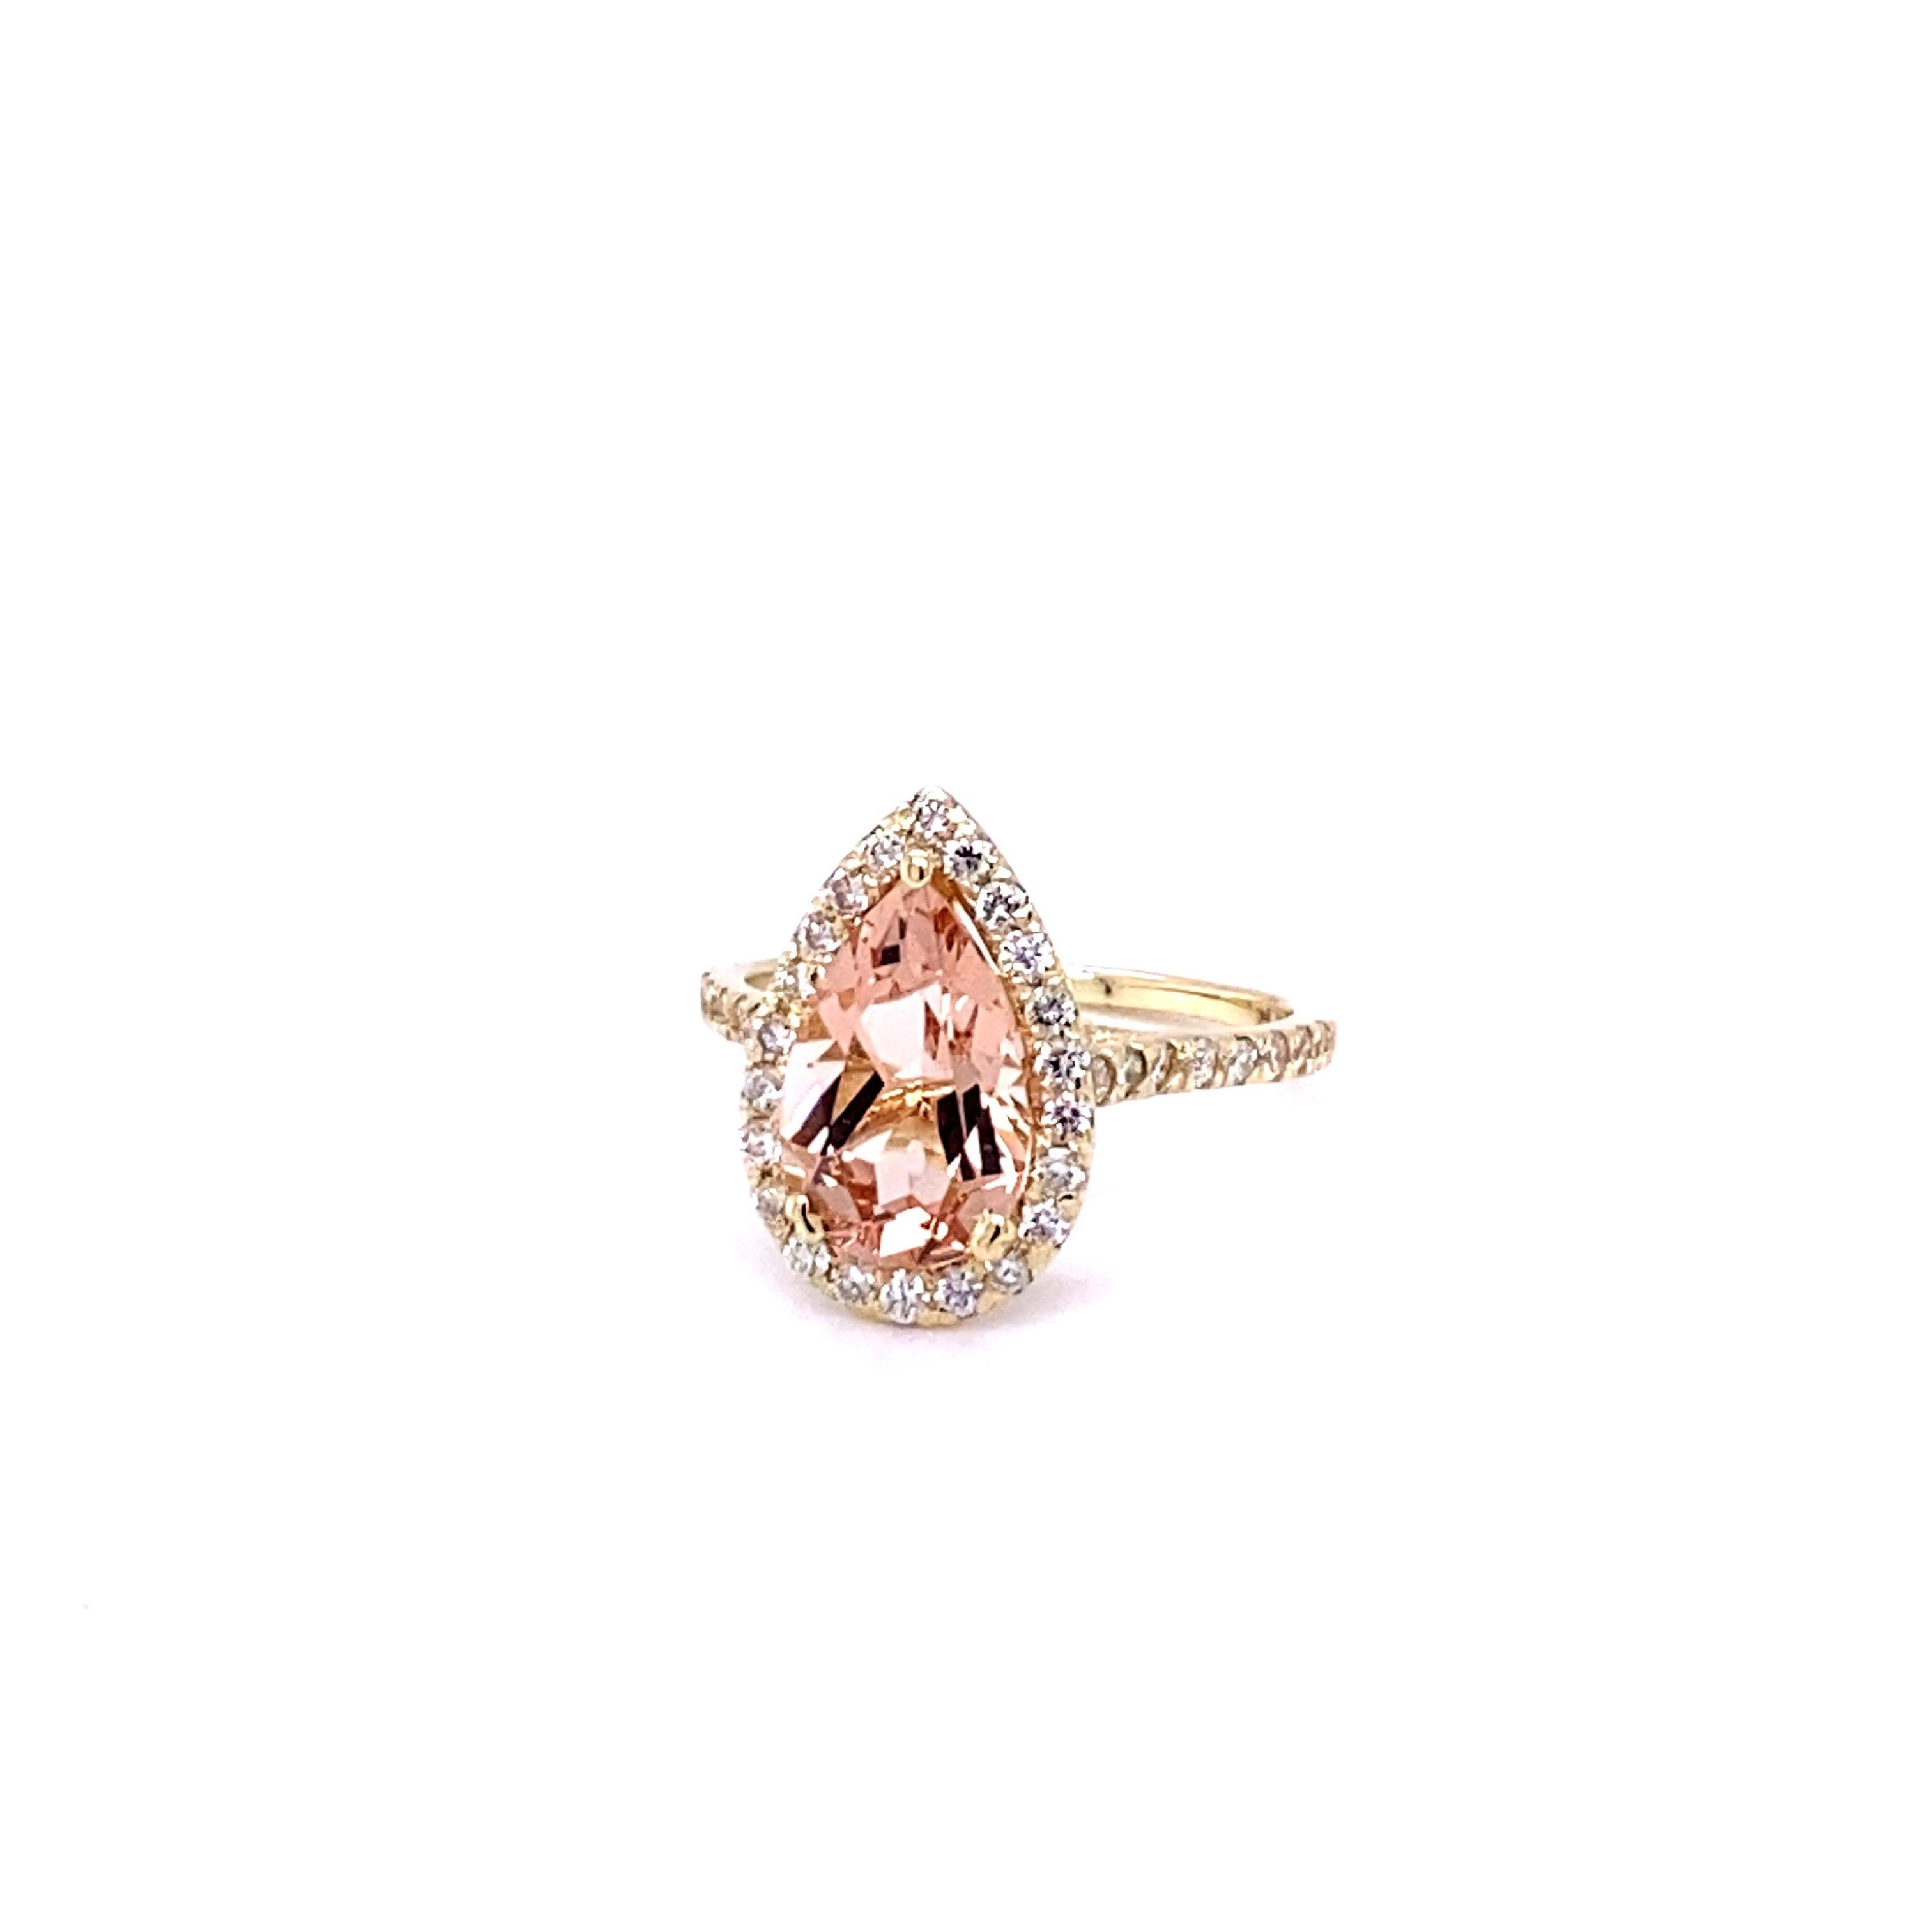 3.04 Carat Morganite Diamond 14K Yellow Gold Engagement Ring

This stunning ring has a Pear Cut Morganite as its center that weighs 2.47 Carats.  The Morganite is surrounded by a Halo of 39 Round Cut Diamonds that weigh 0.57 Carats.  (Clarity: SI2,